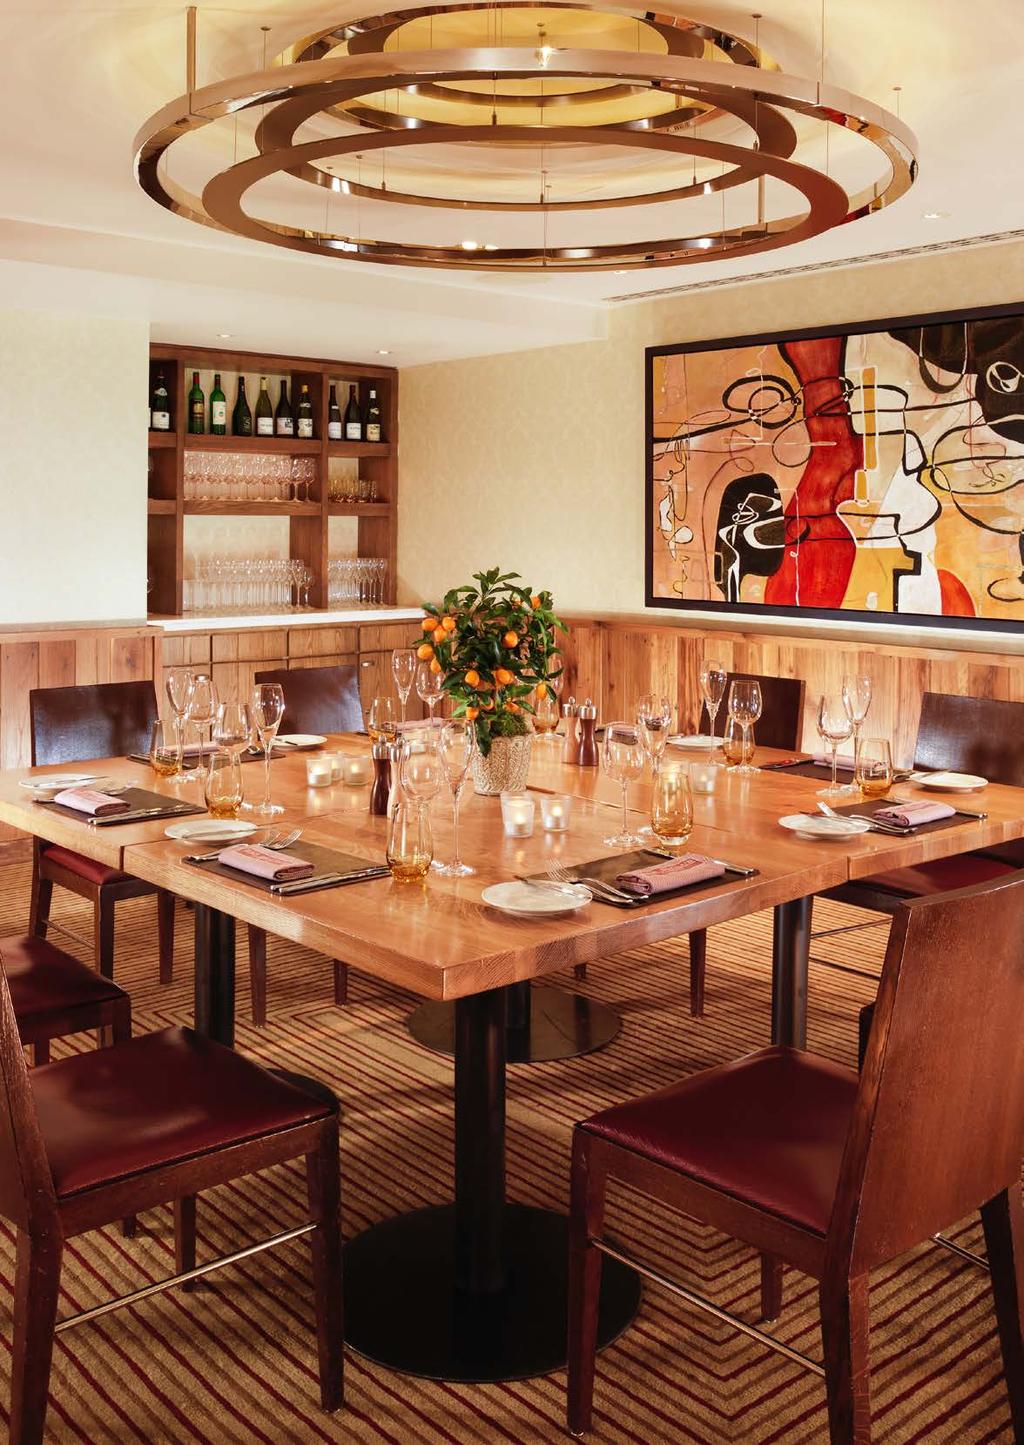 PRIVATE DINING ROOMS EACH OF OUR TWO PRIVATE DINING ROOMS CAN BE RESERVED FOR UP TO 24, AND GUESTS CAN BE